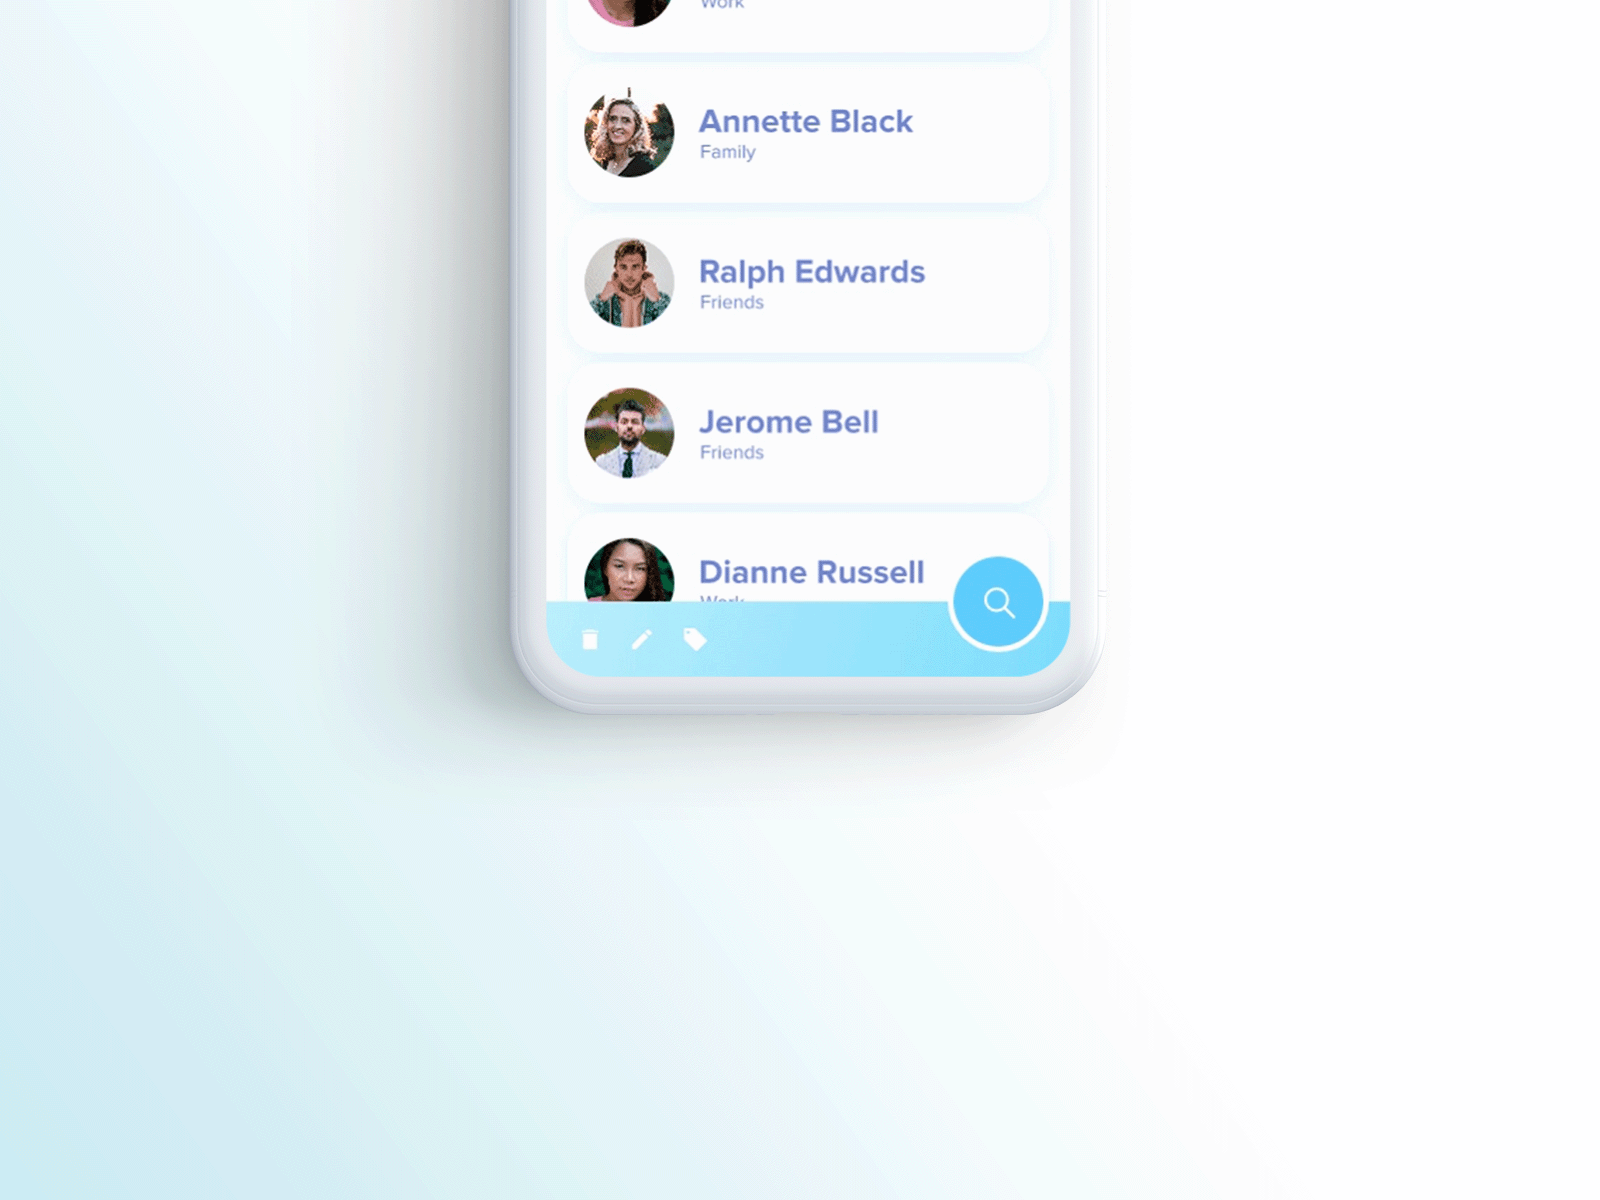 Search — DailyUI #022 022 contacts daily ui dailyui design micro interaction mobile mobile app search ui